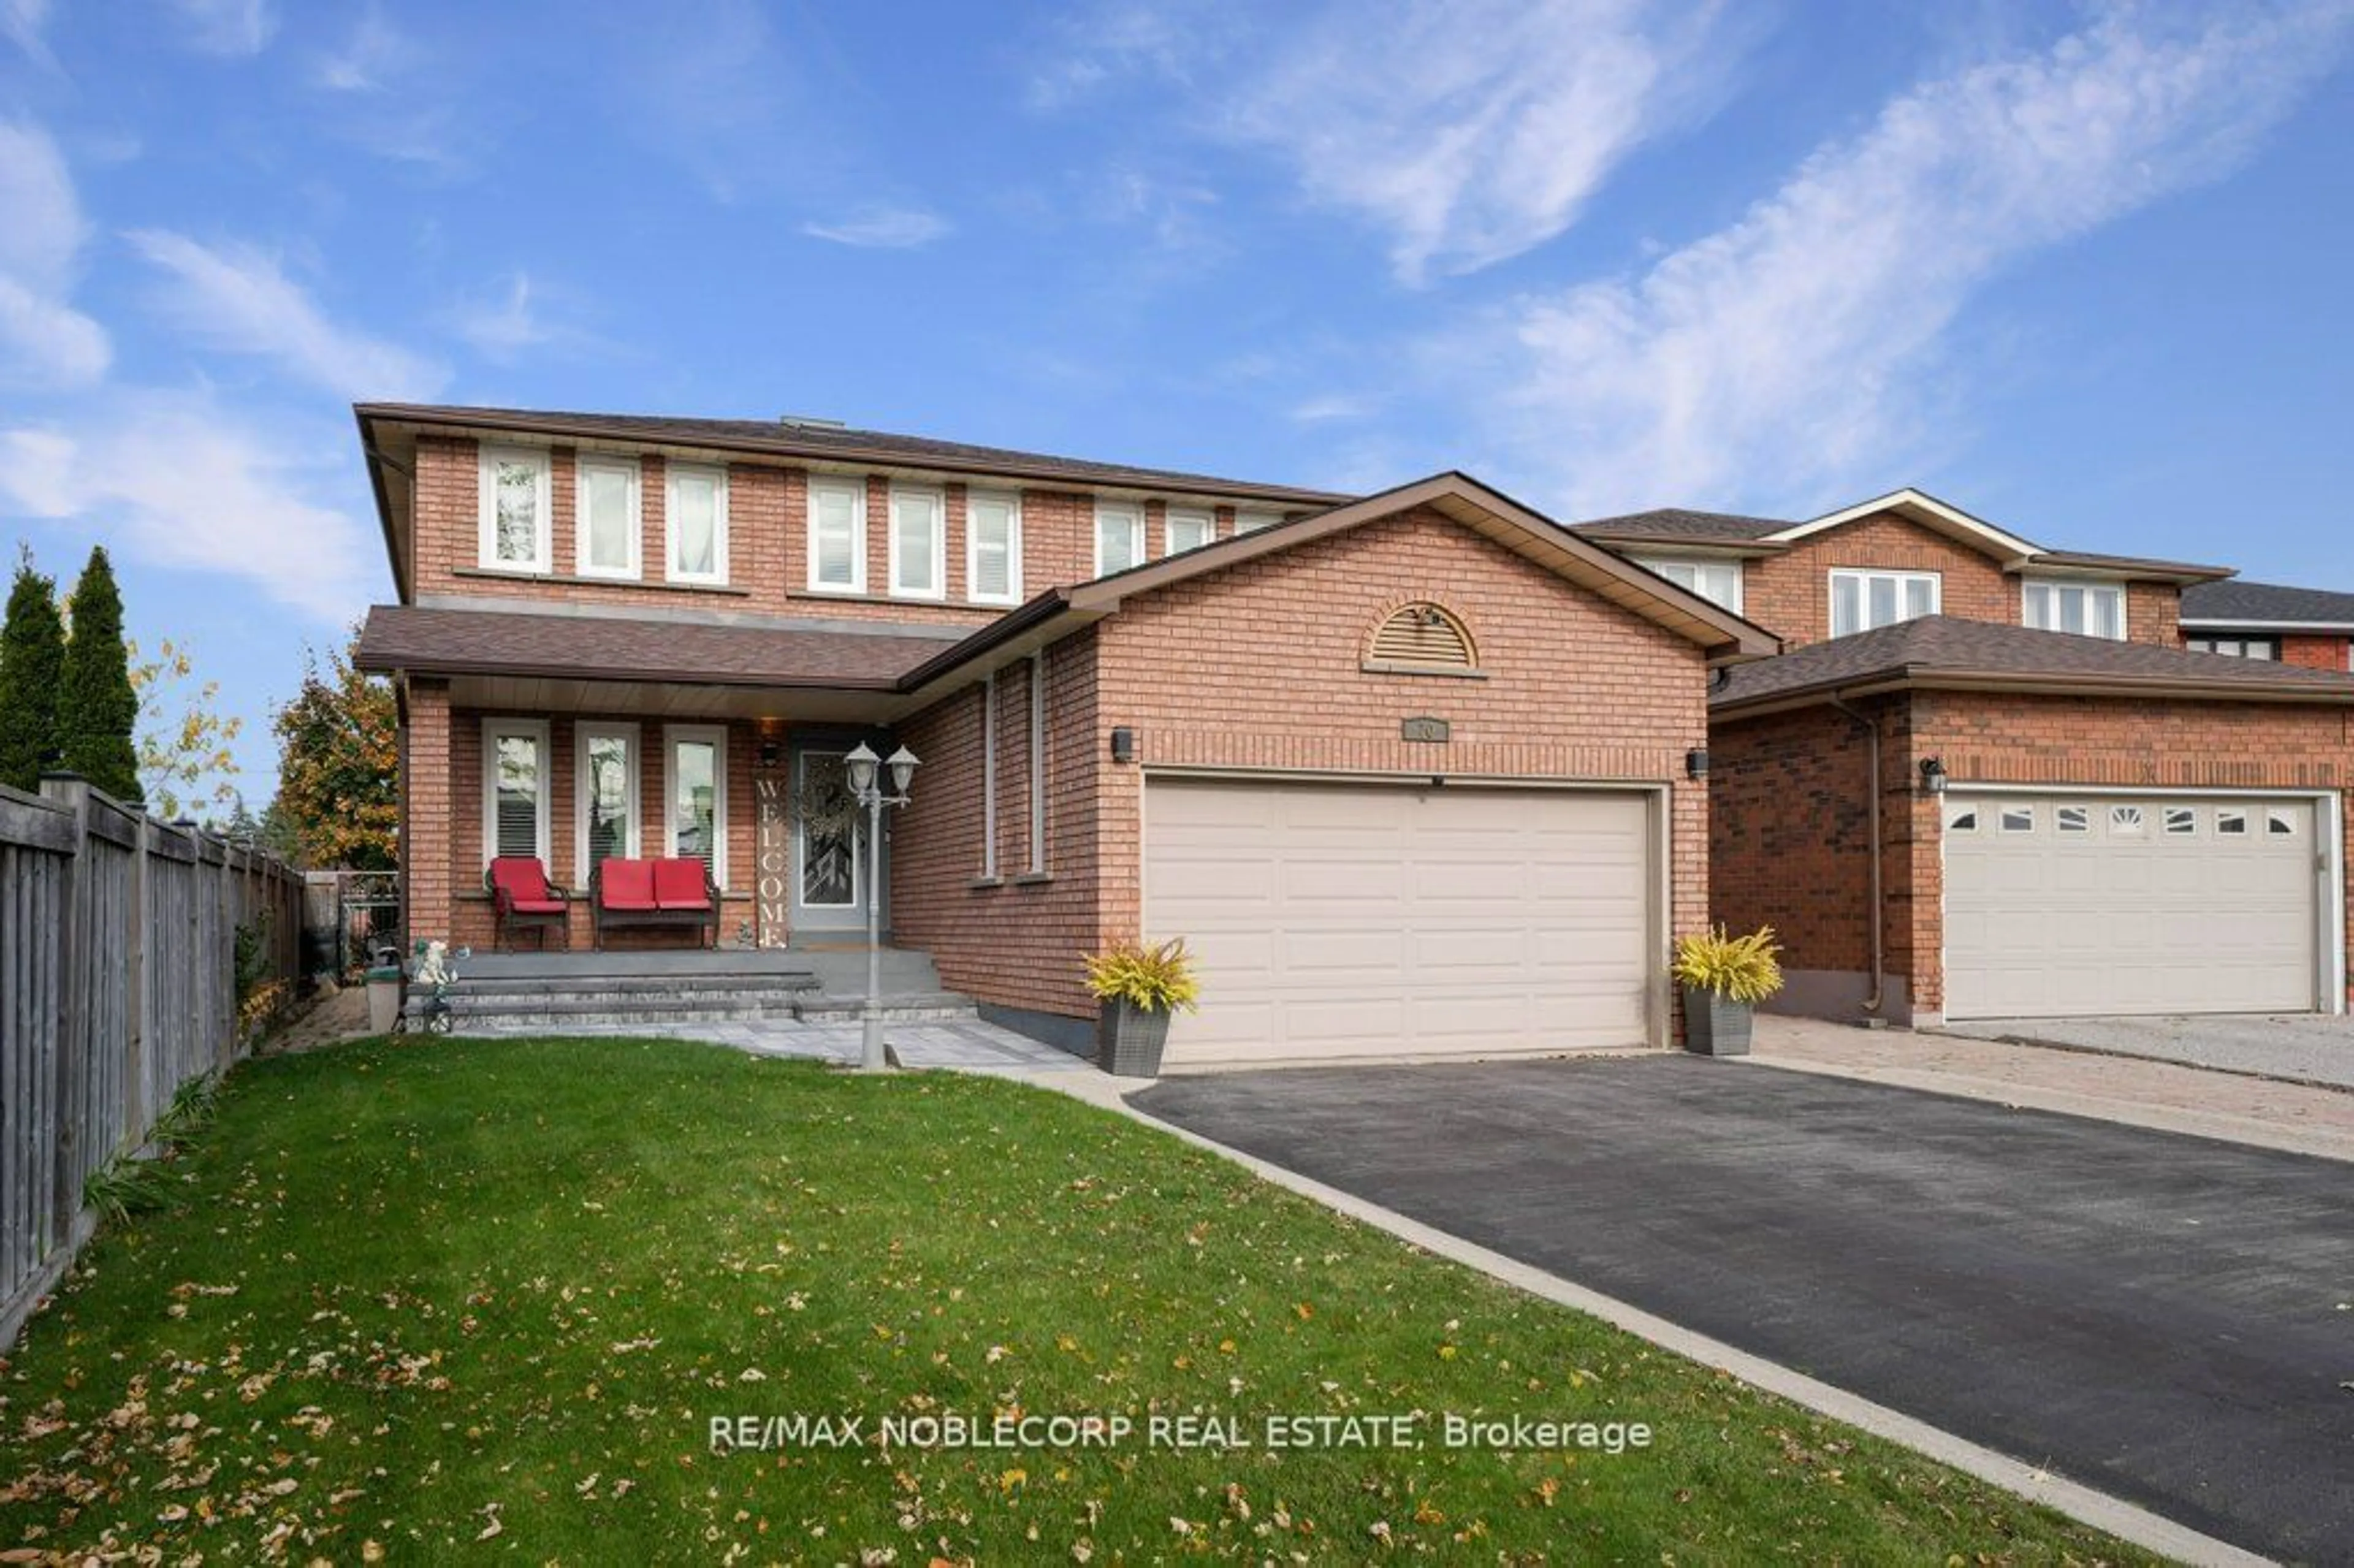 Home with brick exterior material for 70 Lime Dr, Vaughan Ontario L4L 5N2